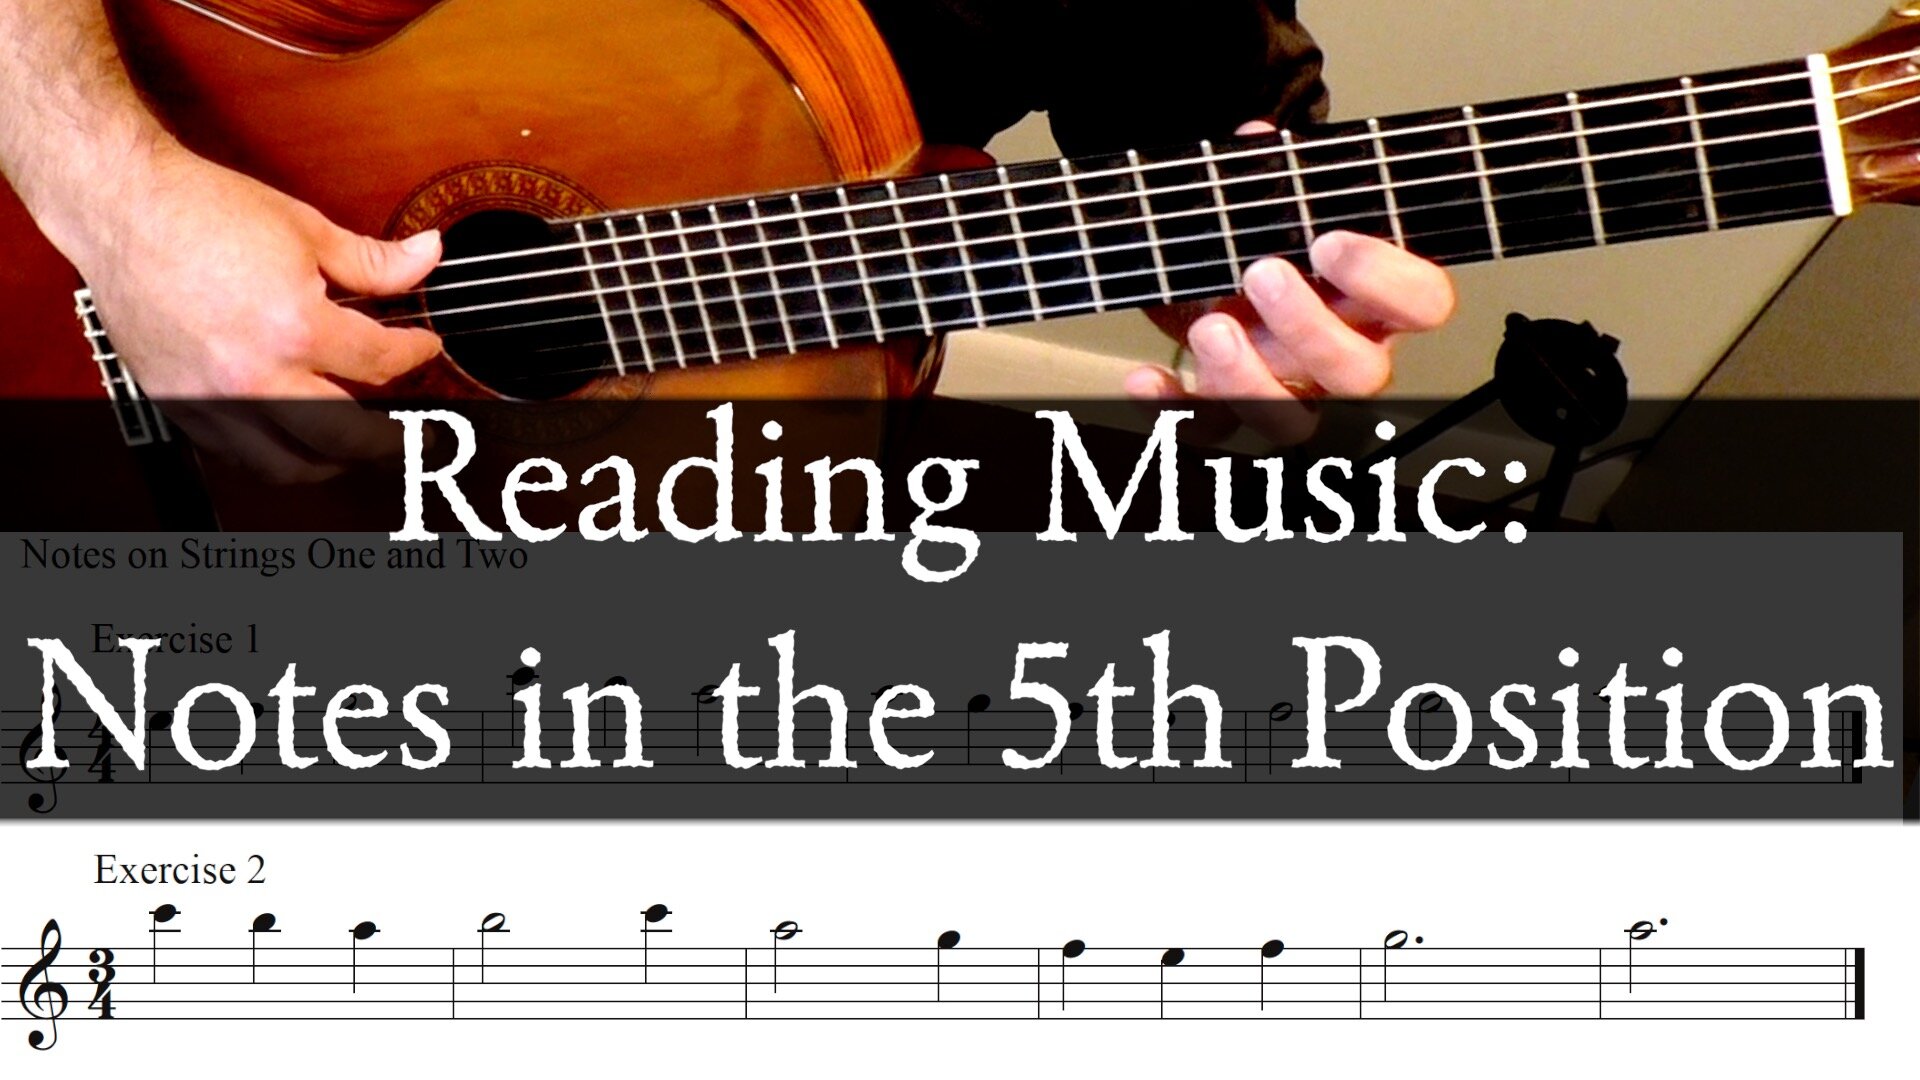 Reading Music: 5th Position